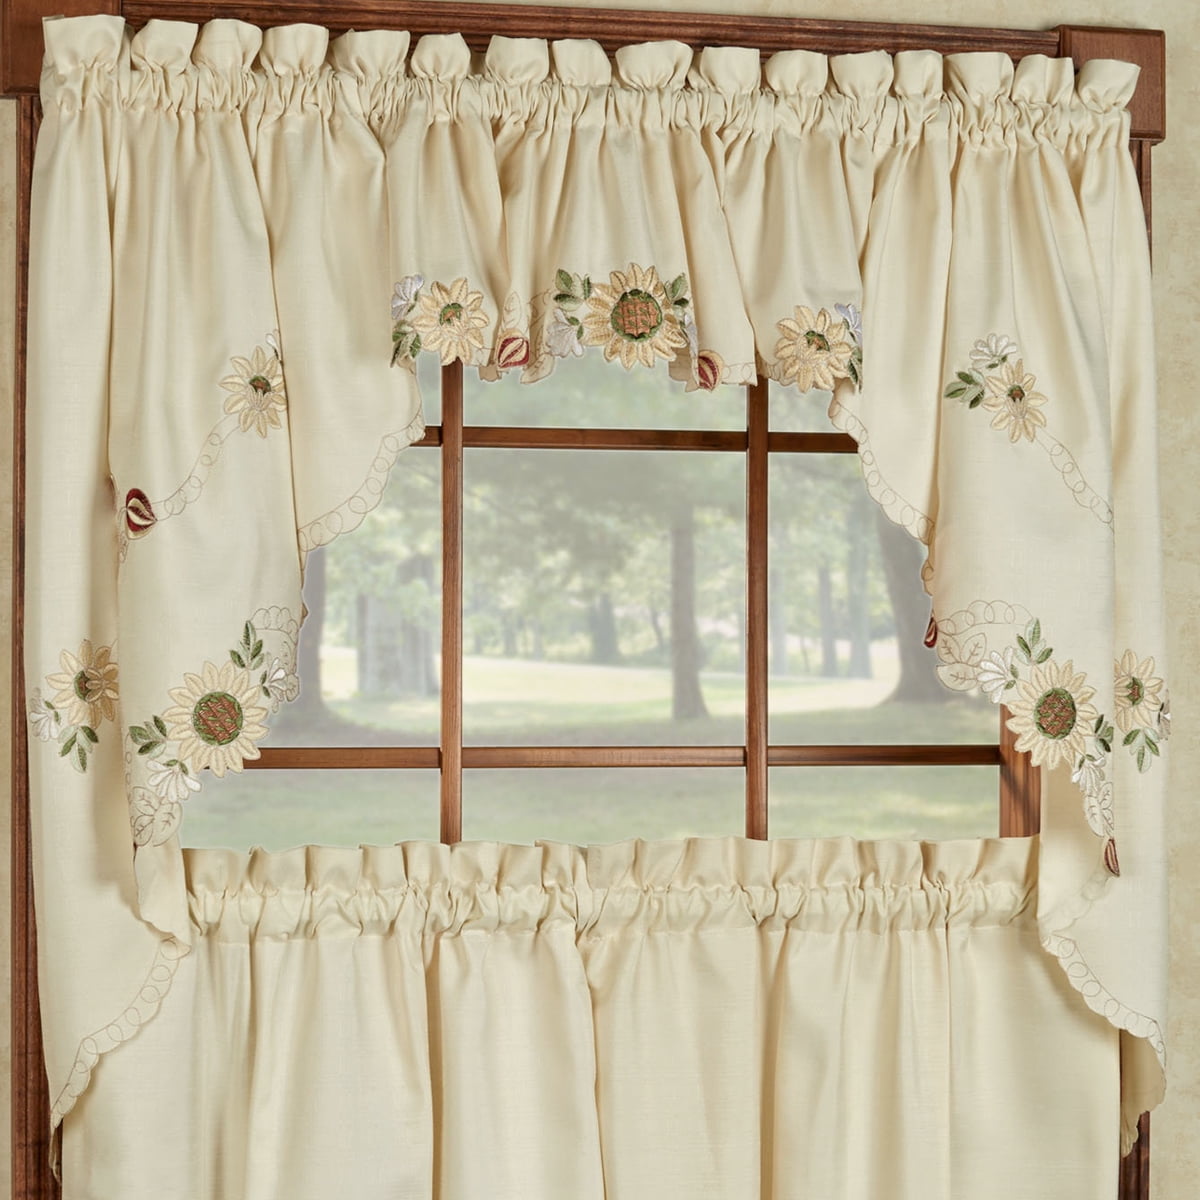 3 Piece Embroidery Kitchen Curtain Set gift 